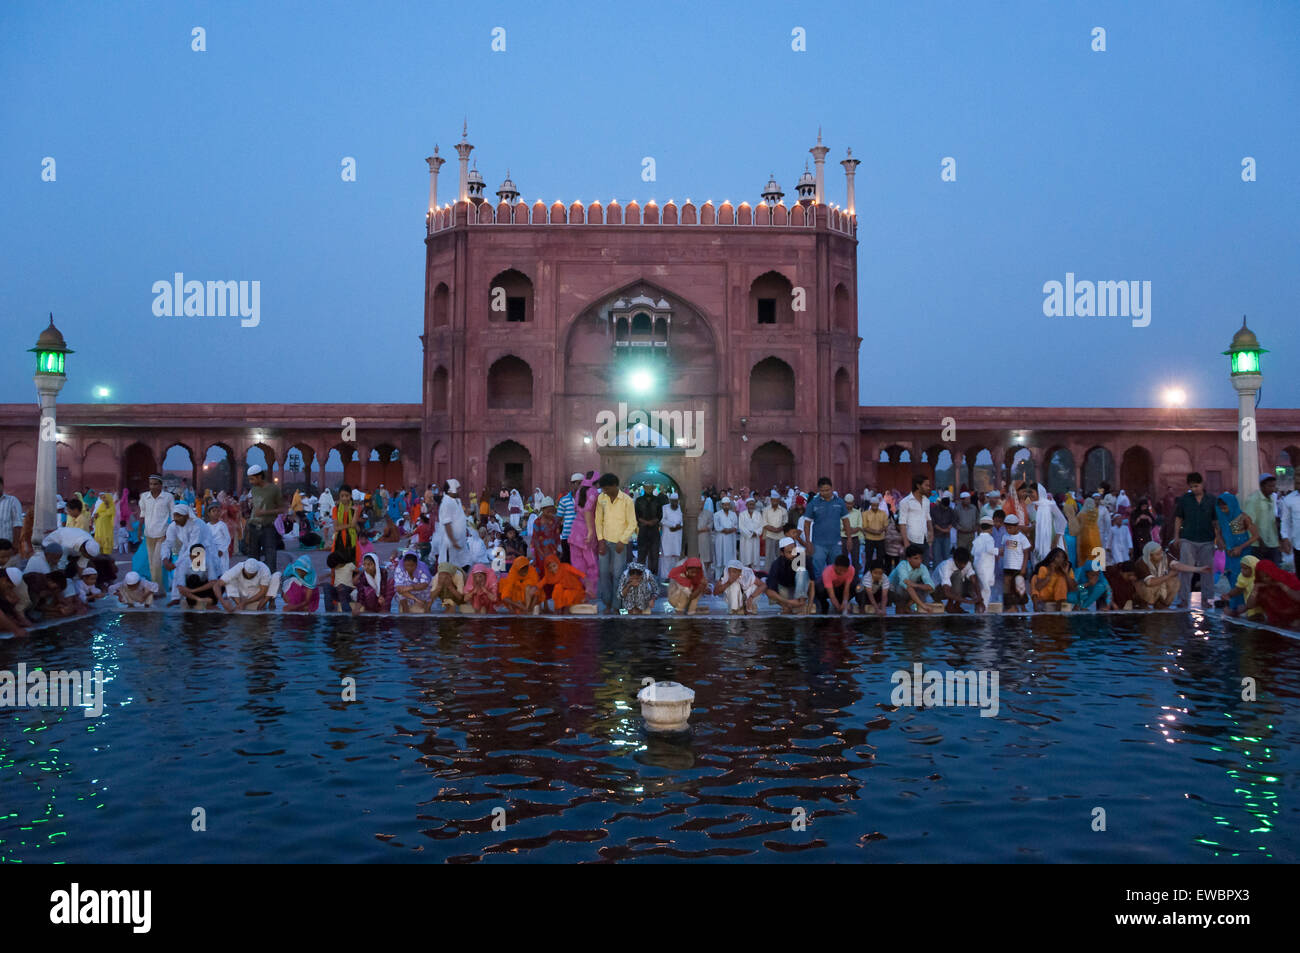 People at the ablution pond in Jama Masjid during Ramadan. Old Delhi, India Stock Photo